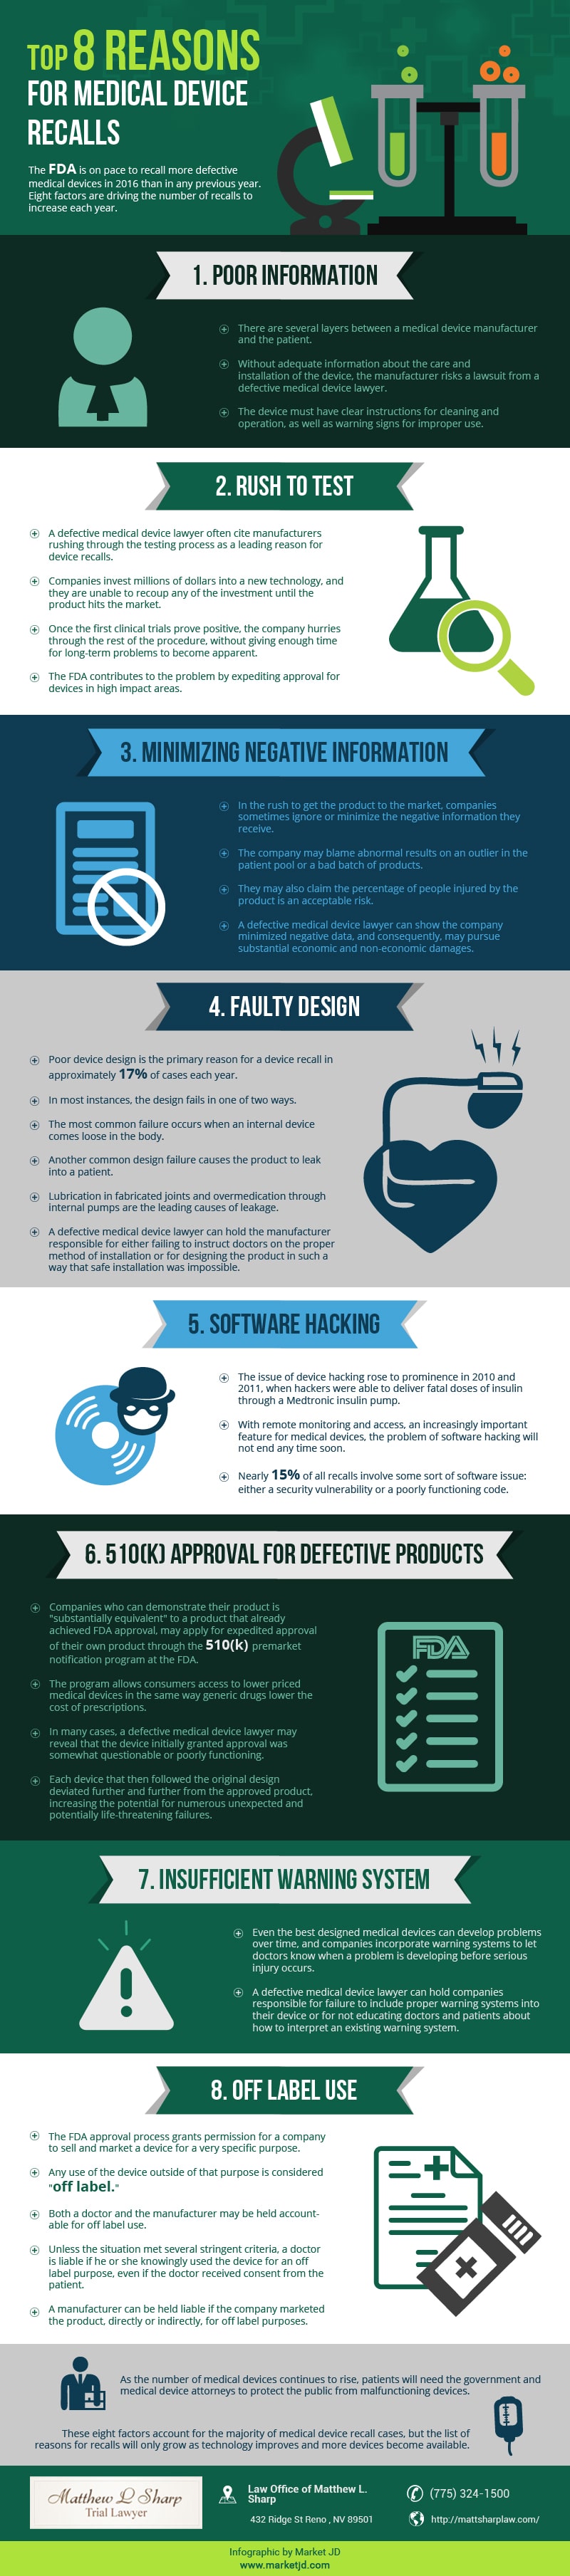 infographic_Top 8 Reasons For Medical Device Recalls